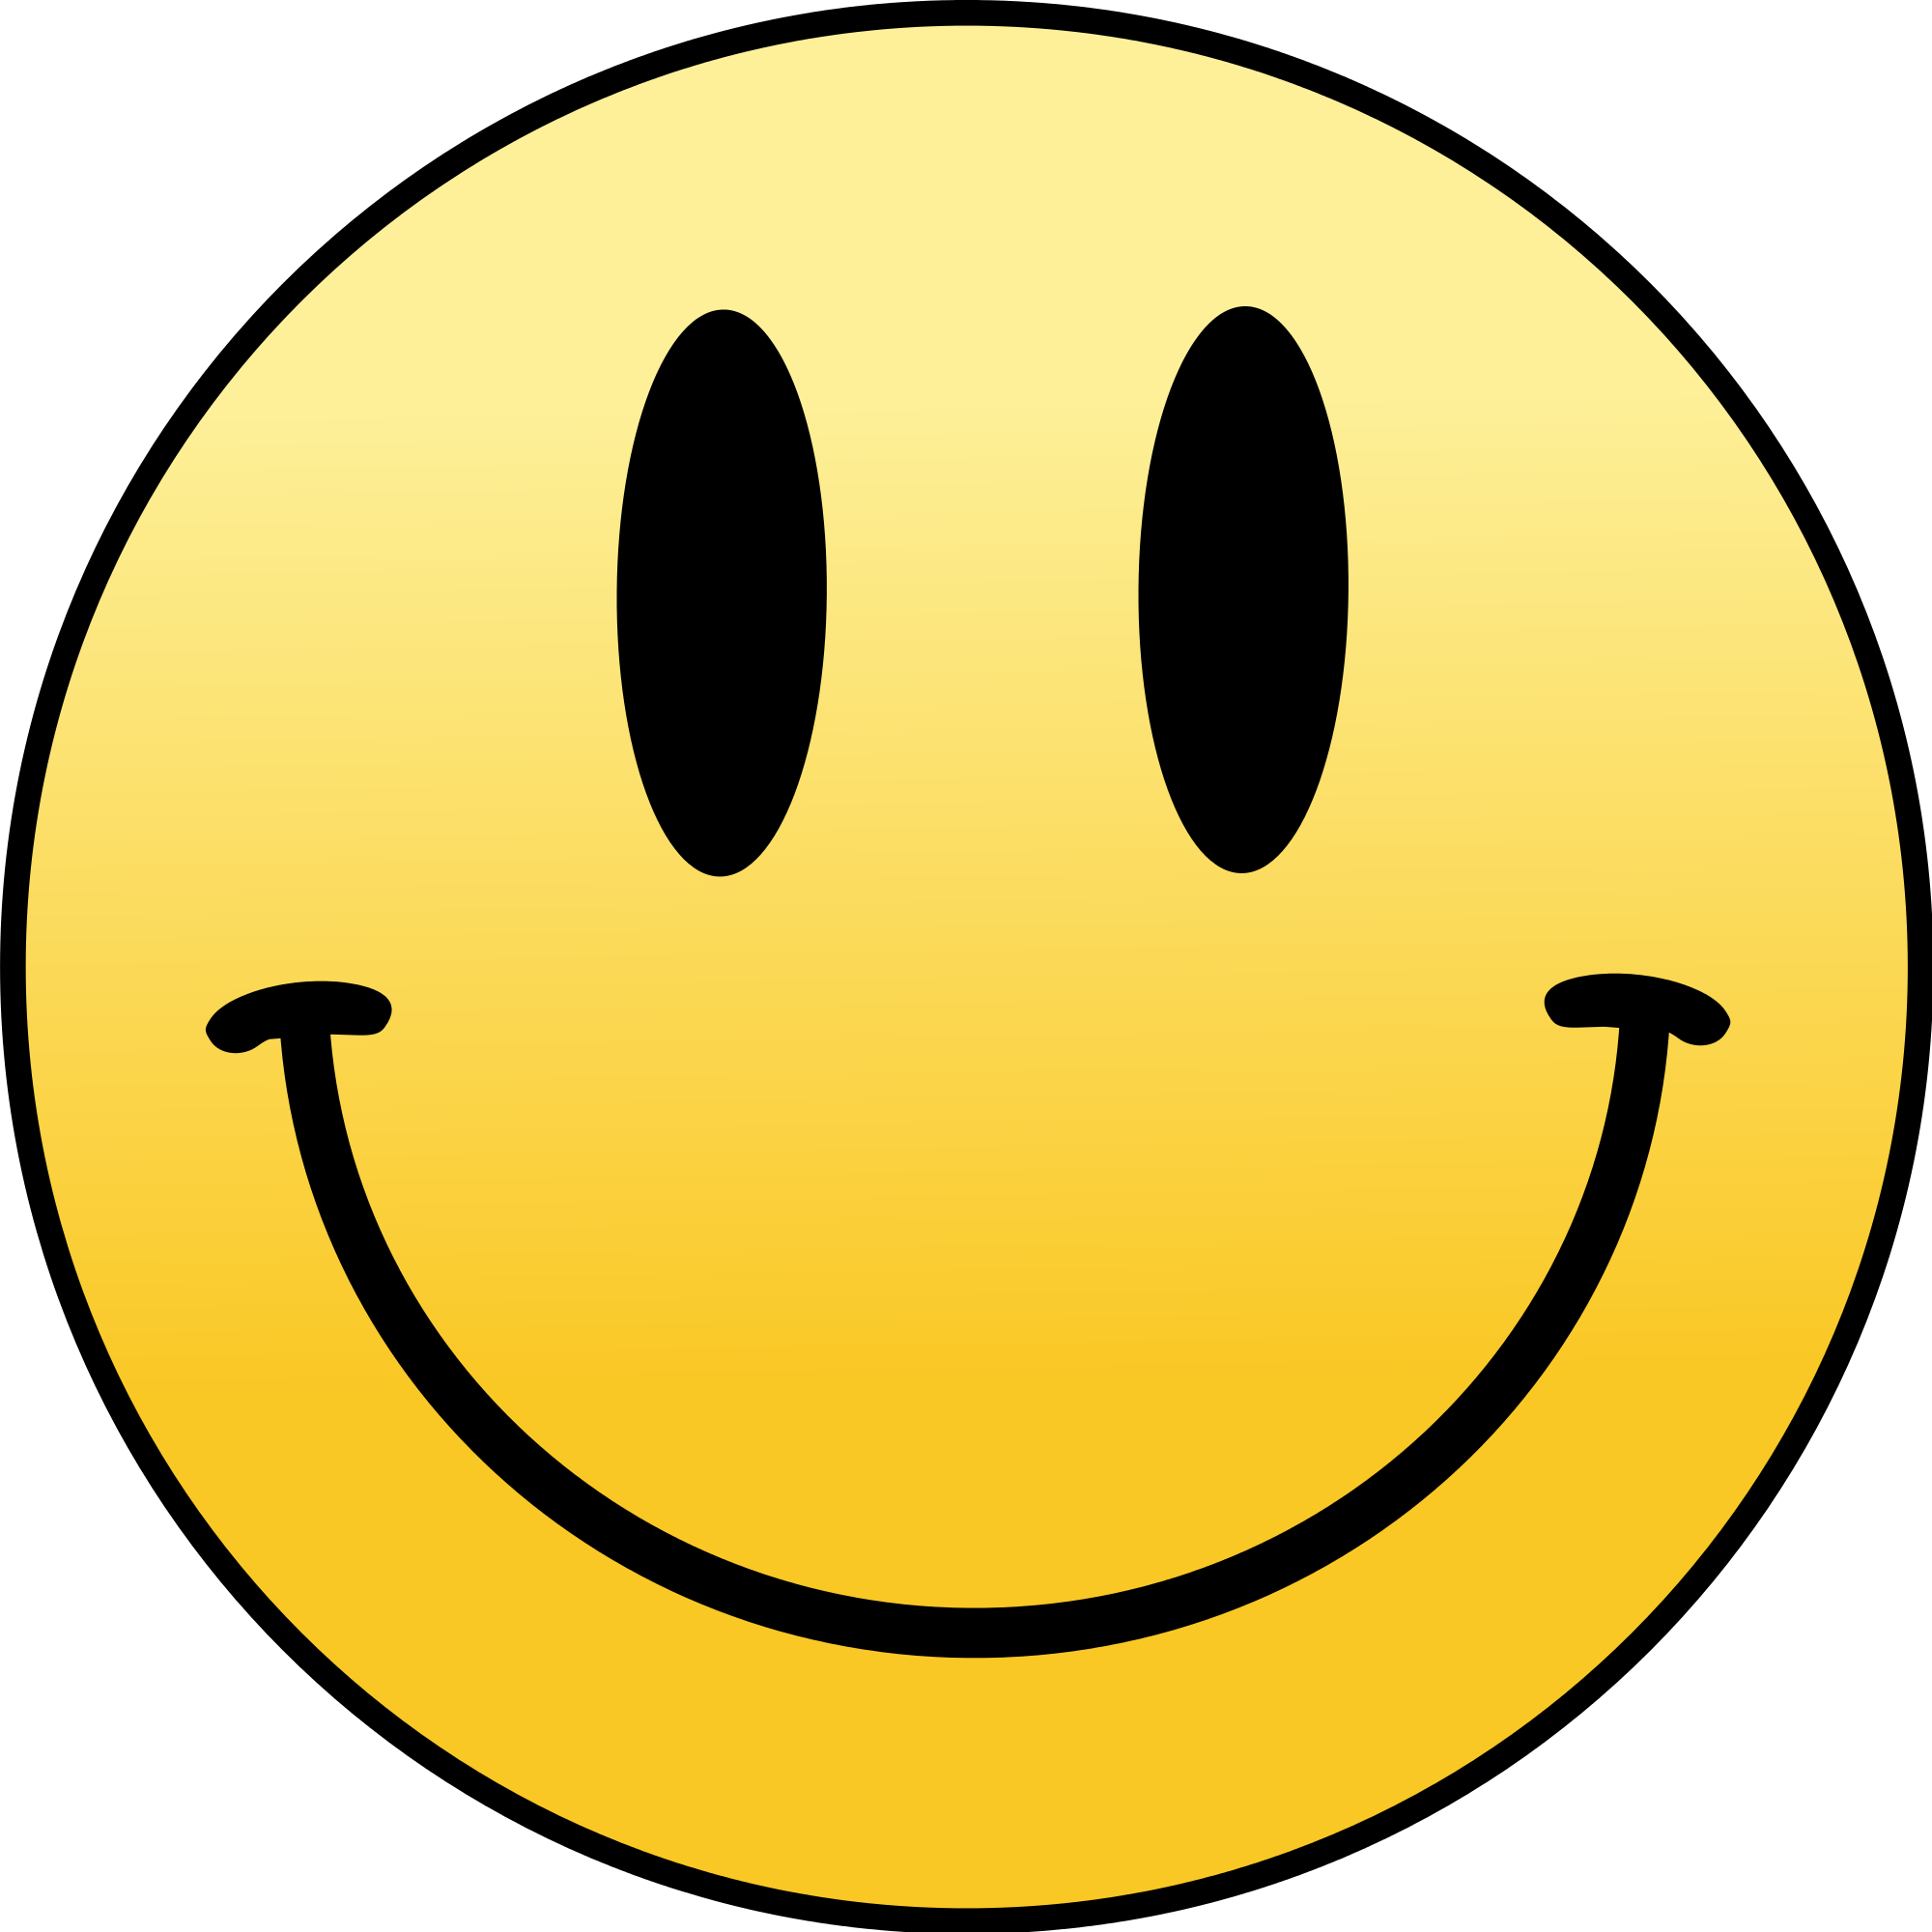 Free Smiley Face Transparent Download Free Smiley Face Transparent Png